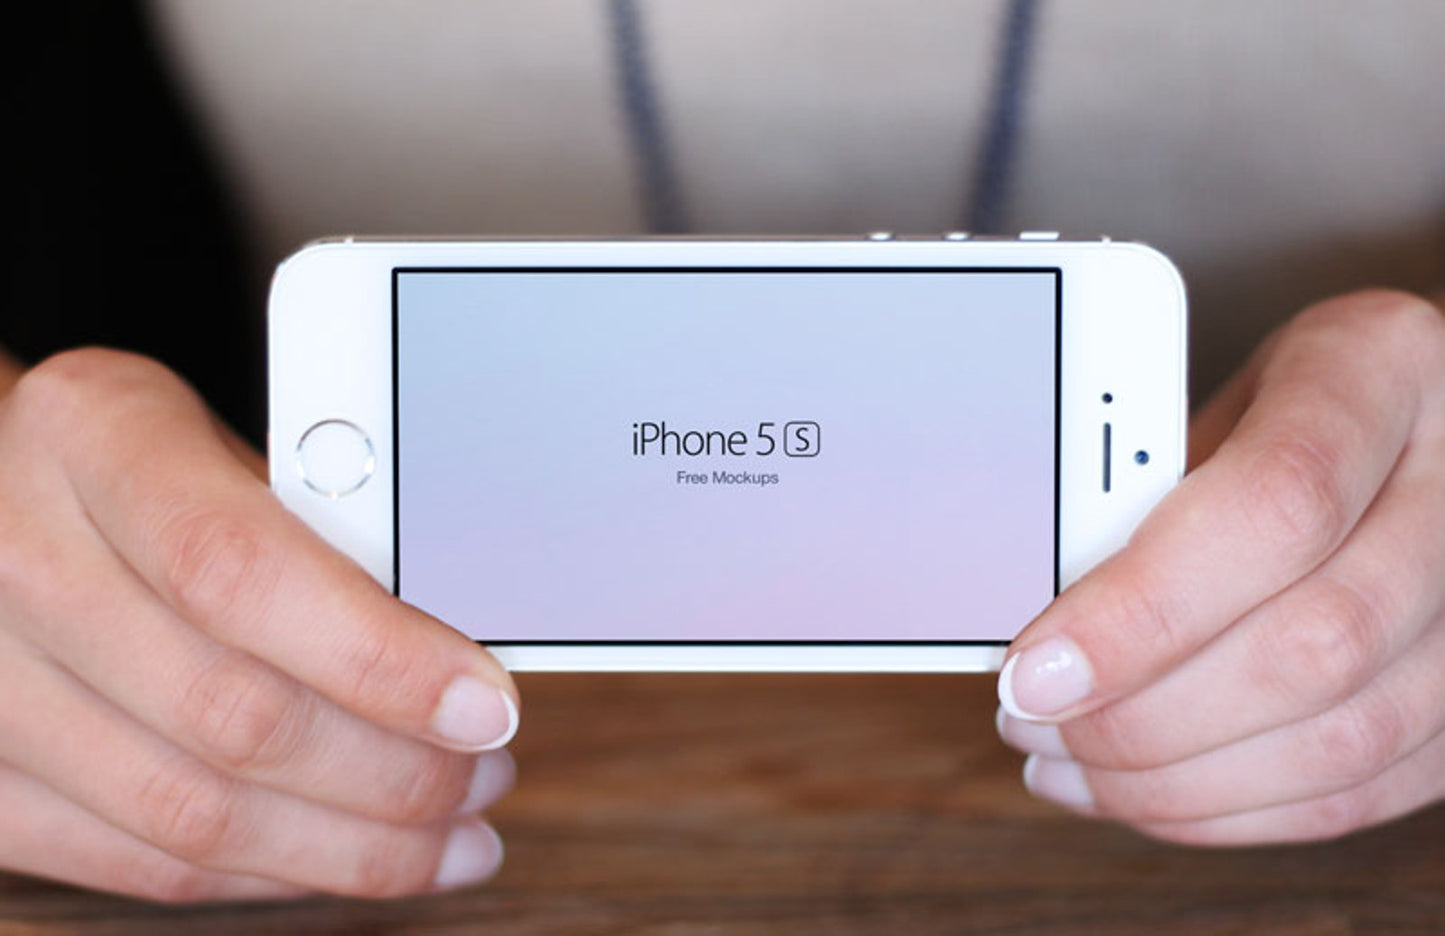 Free Set of iPhone 5S In Hand (Mockup)